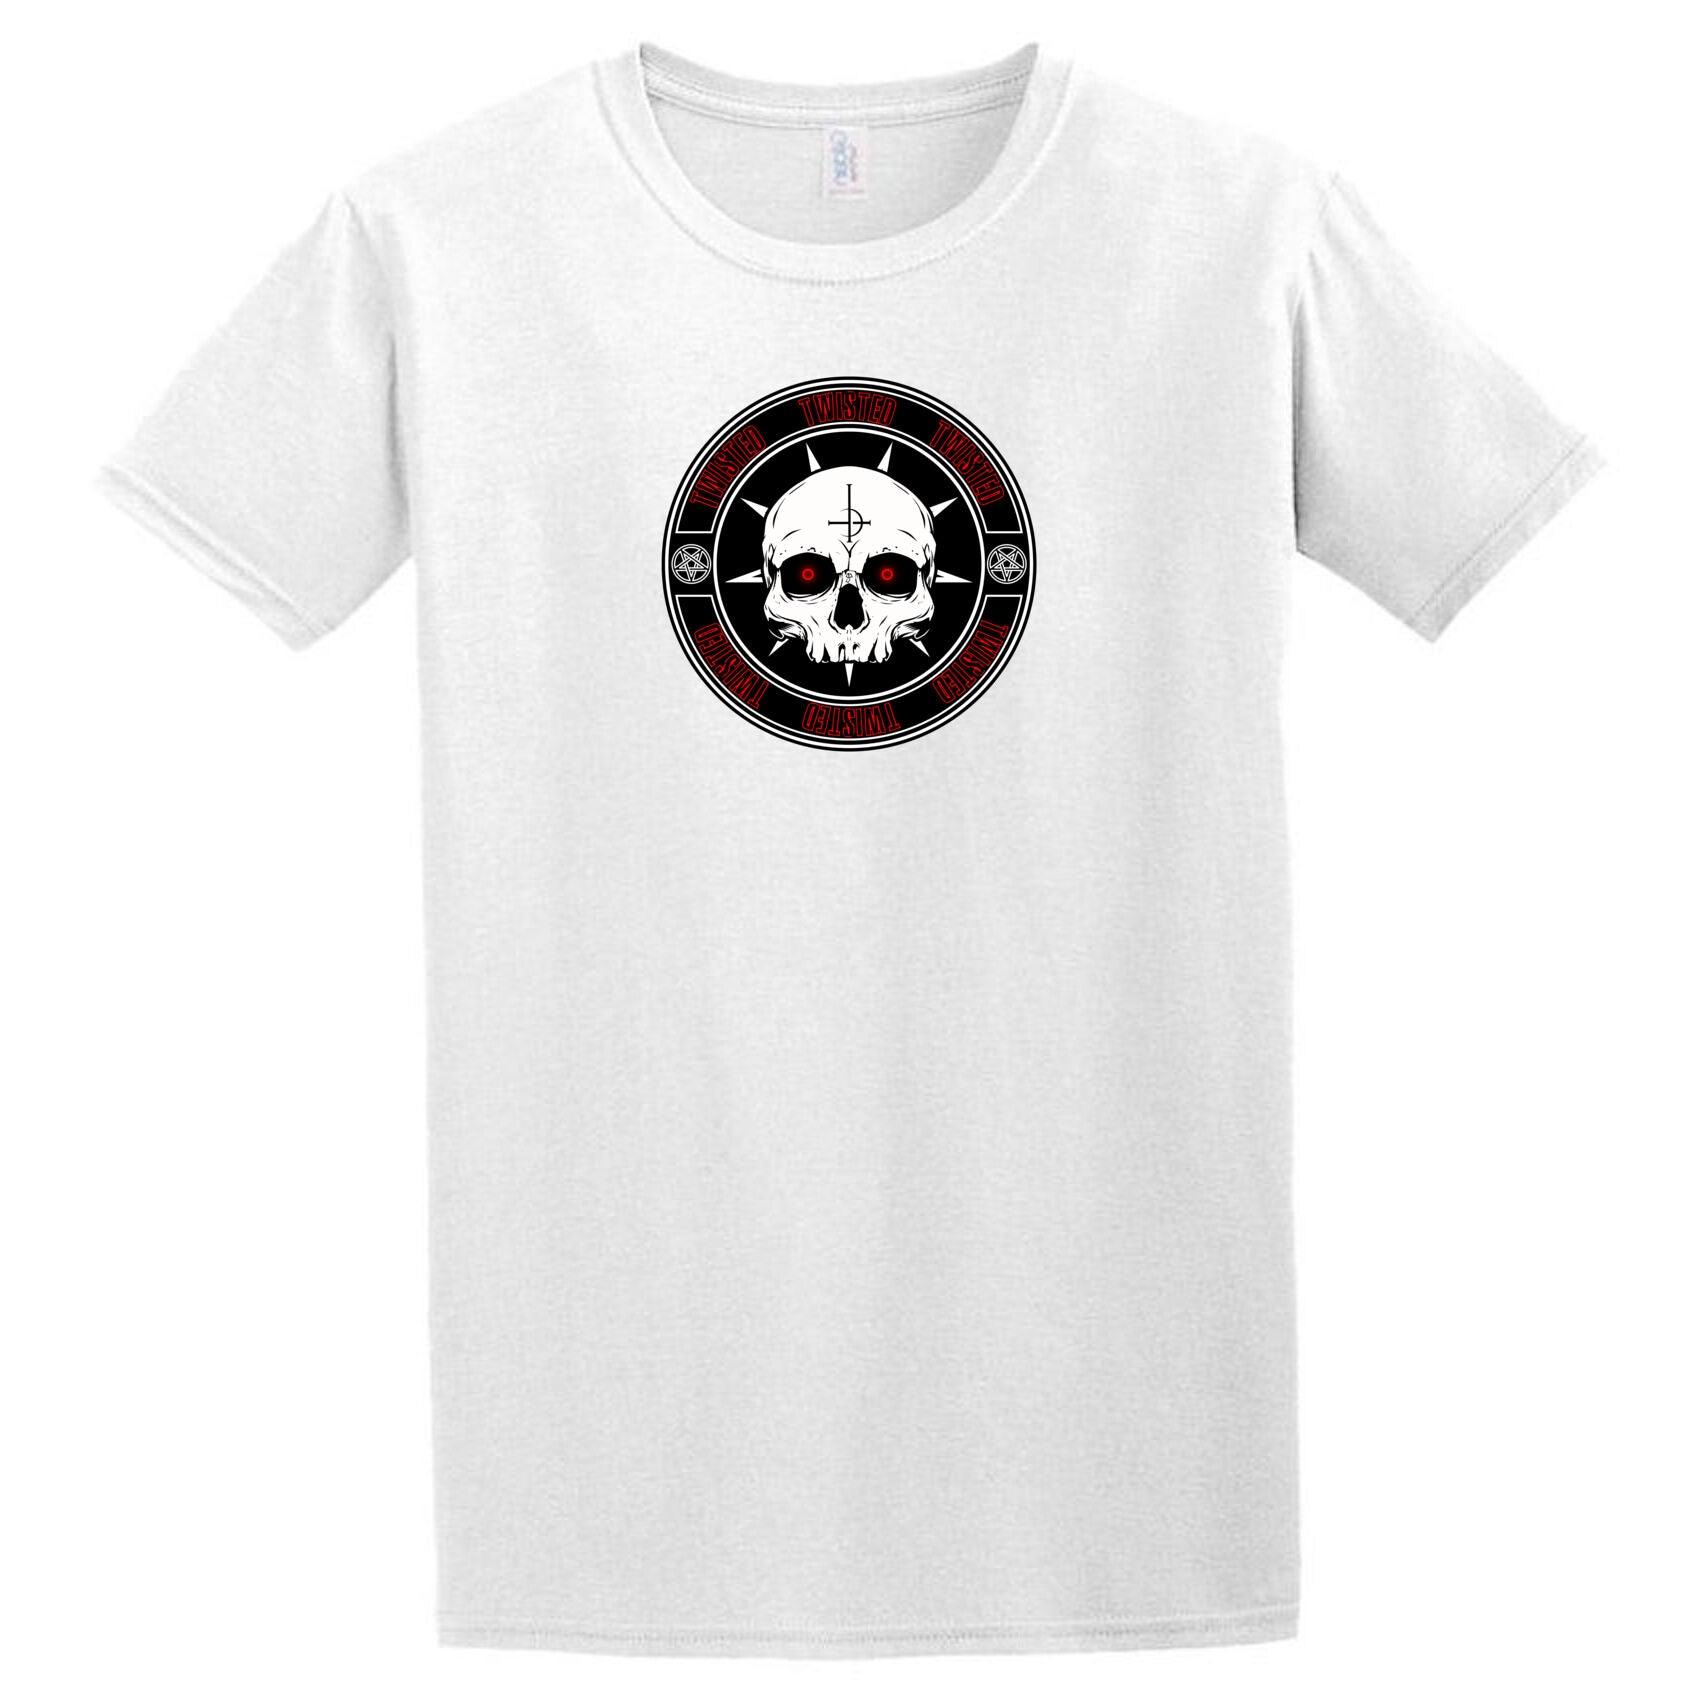 A Twisted Skull T-Shirt from Twisted Gifts with a skull on it.